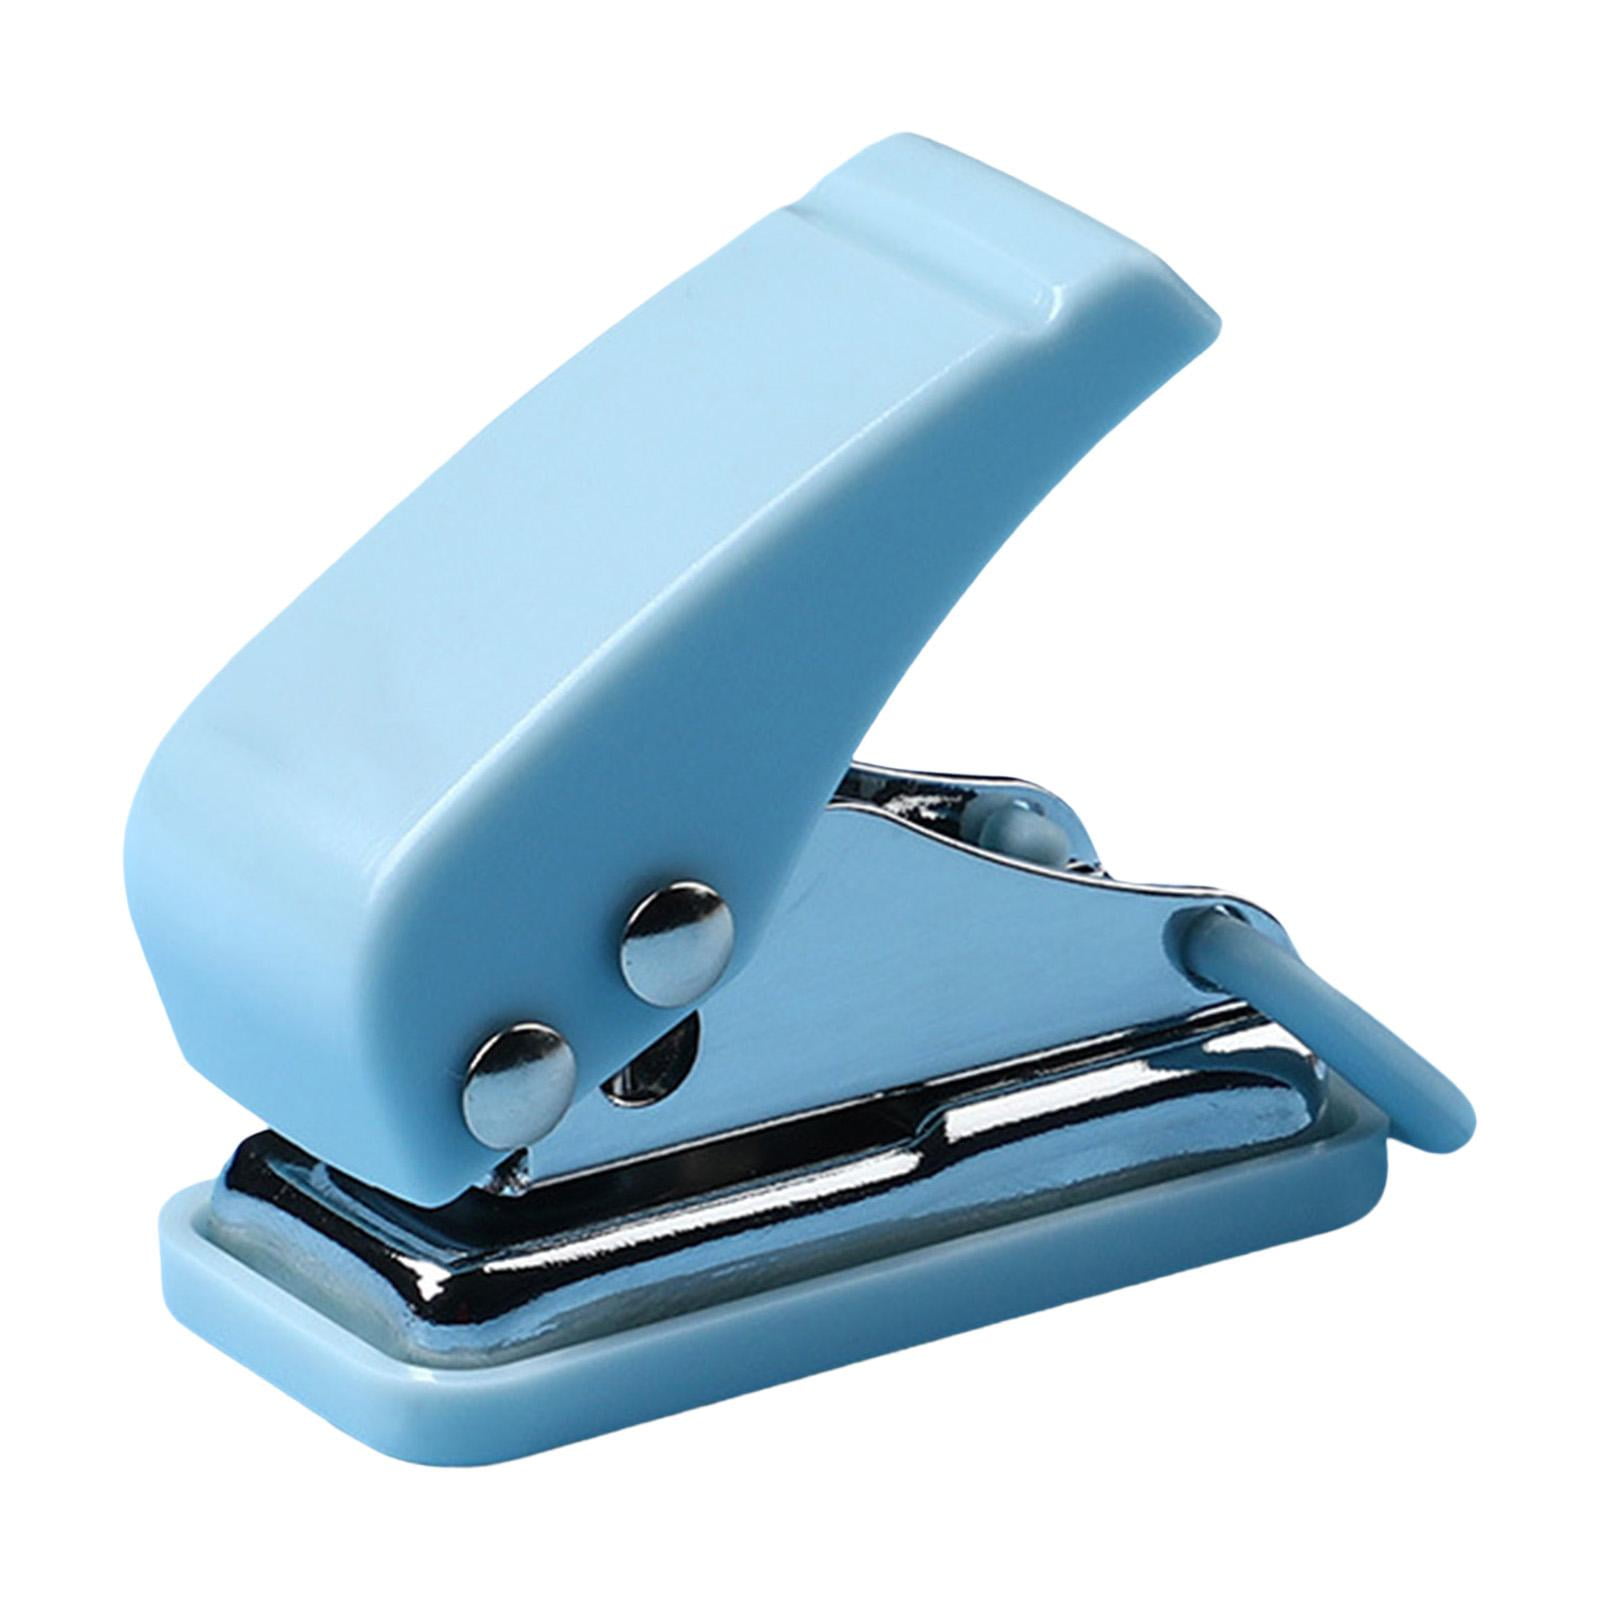 1pc Metal 6 Hole Punch, Portable Handheld Hole Puncher, Daily Paper Puncher  For A4/A5/B5 Size, Loose Leaf Hole Punch, 10 Sheet Capacity baby blue